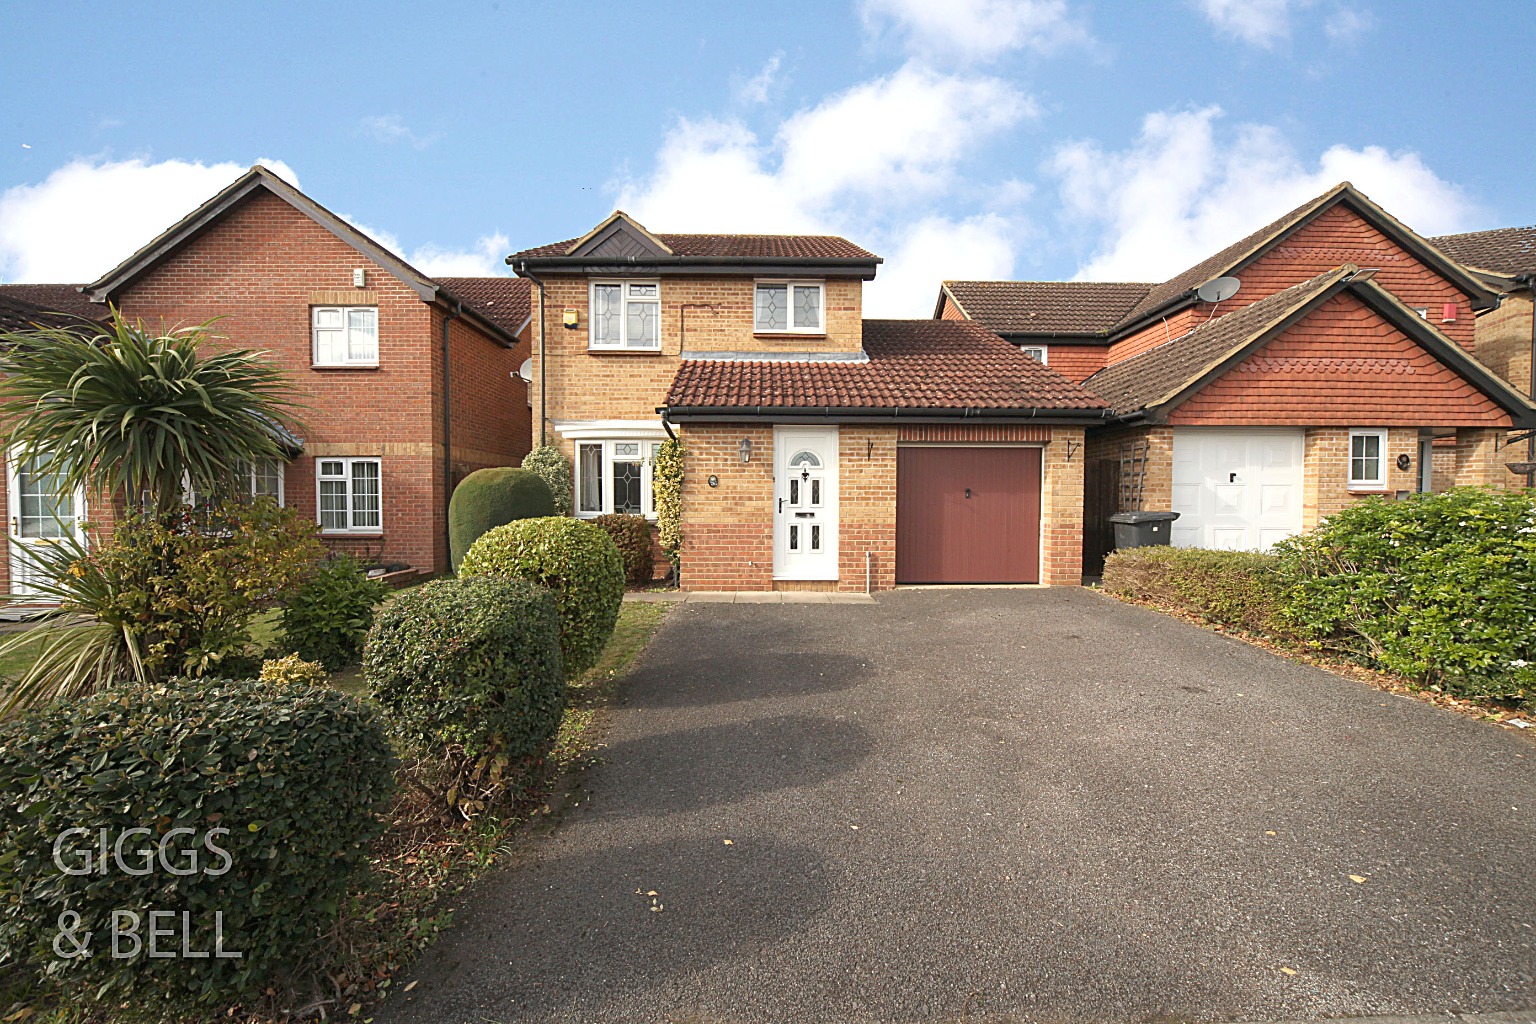 3 bed detached house for sale in Thetford Gardens, Luton - Property Image 1